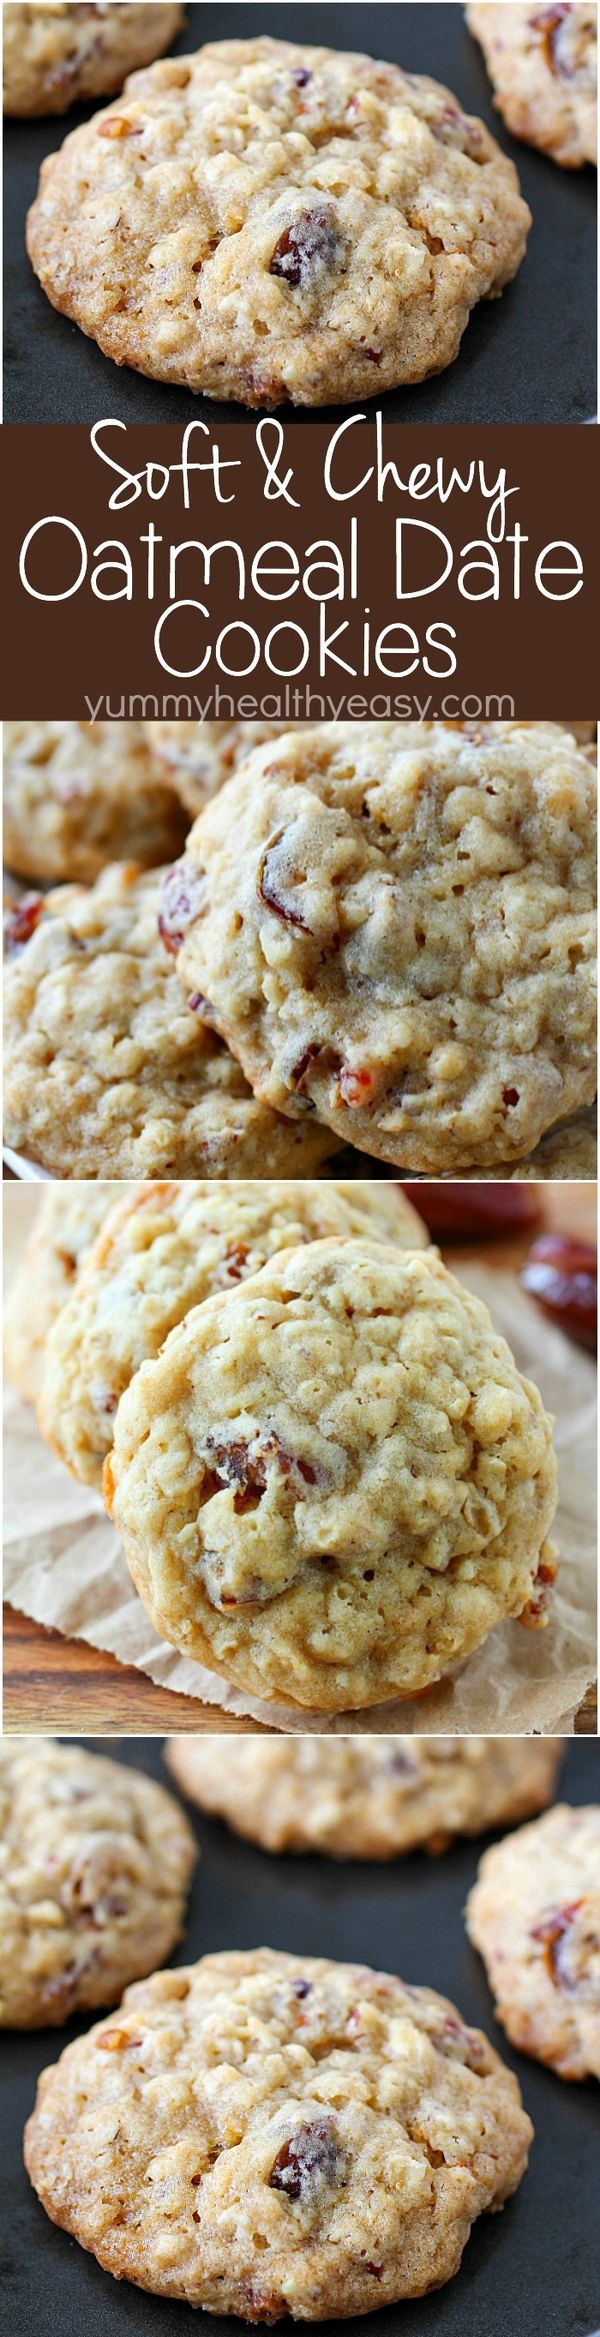 Soft & Chewy Oatmeal Date Cookies